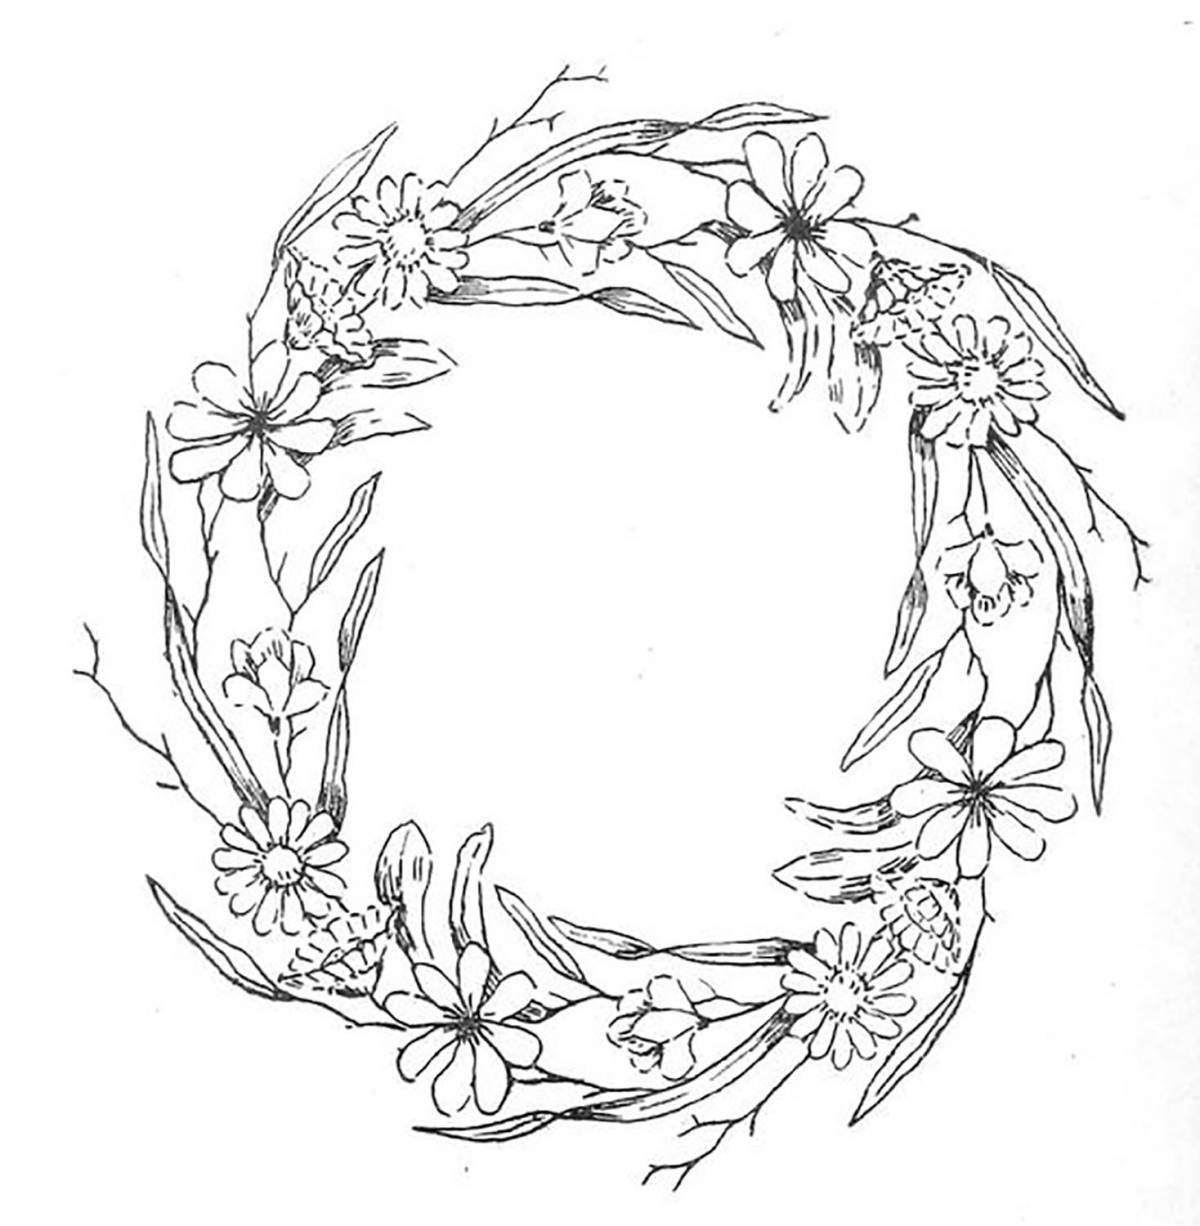 Colorful flower wreath coloring book